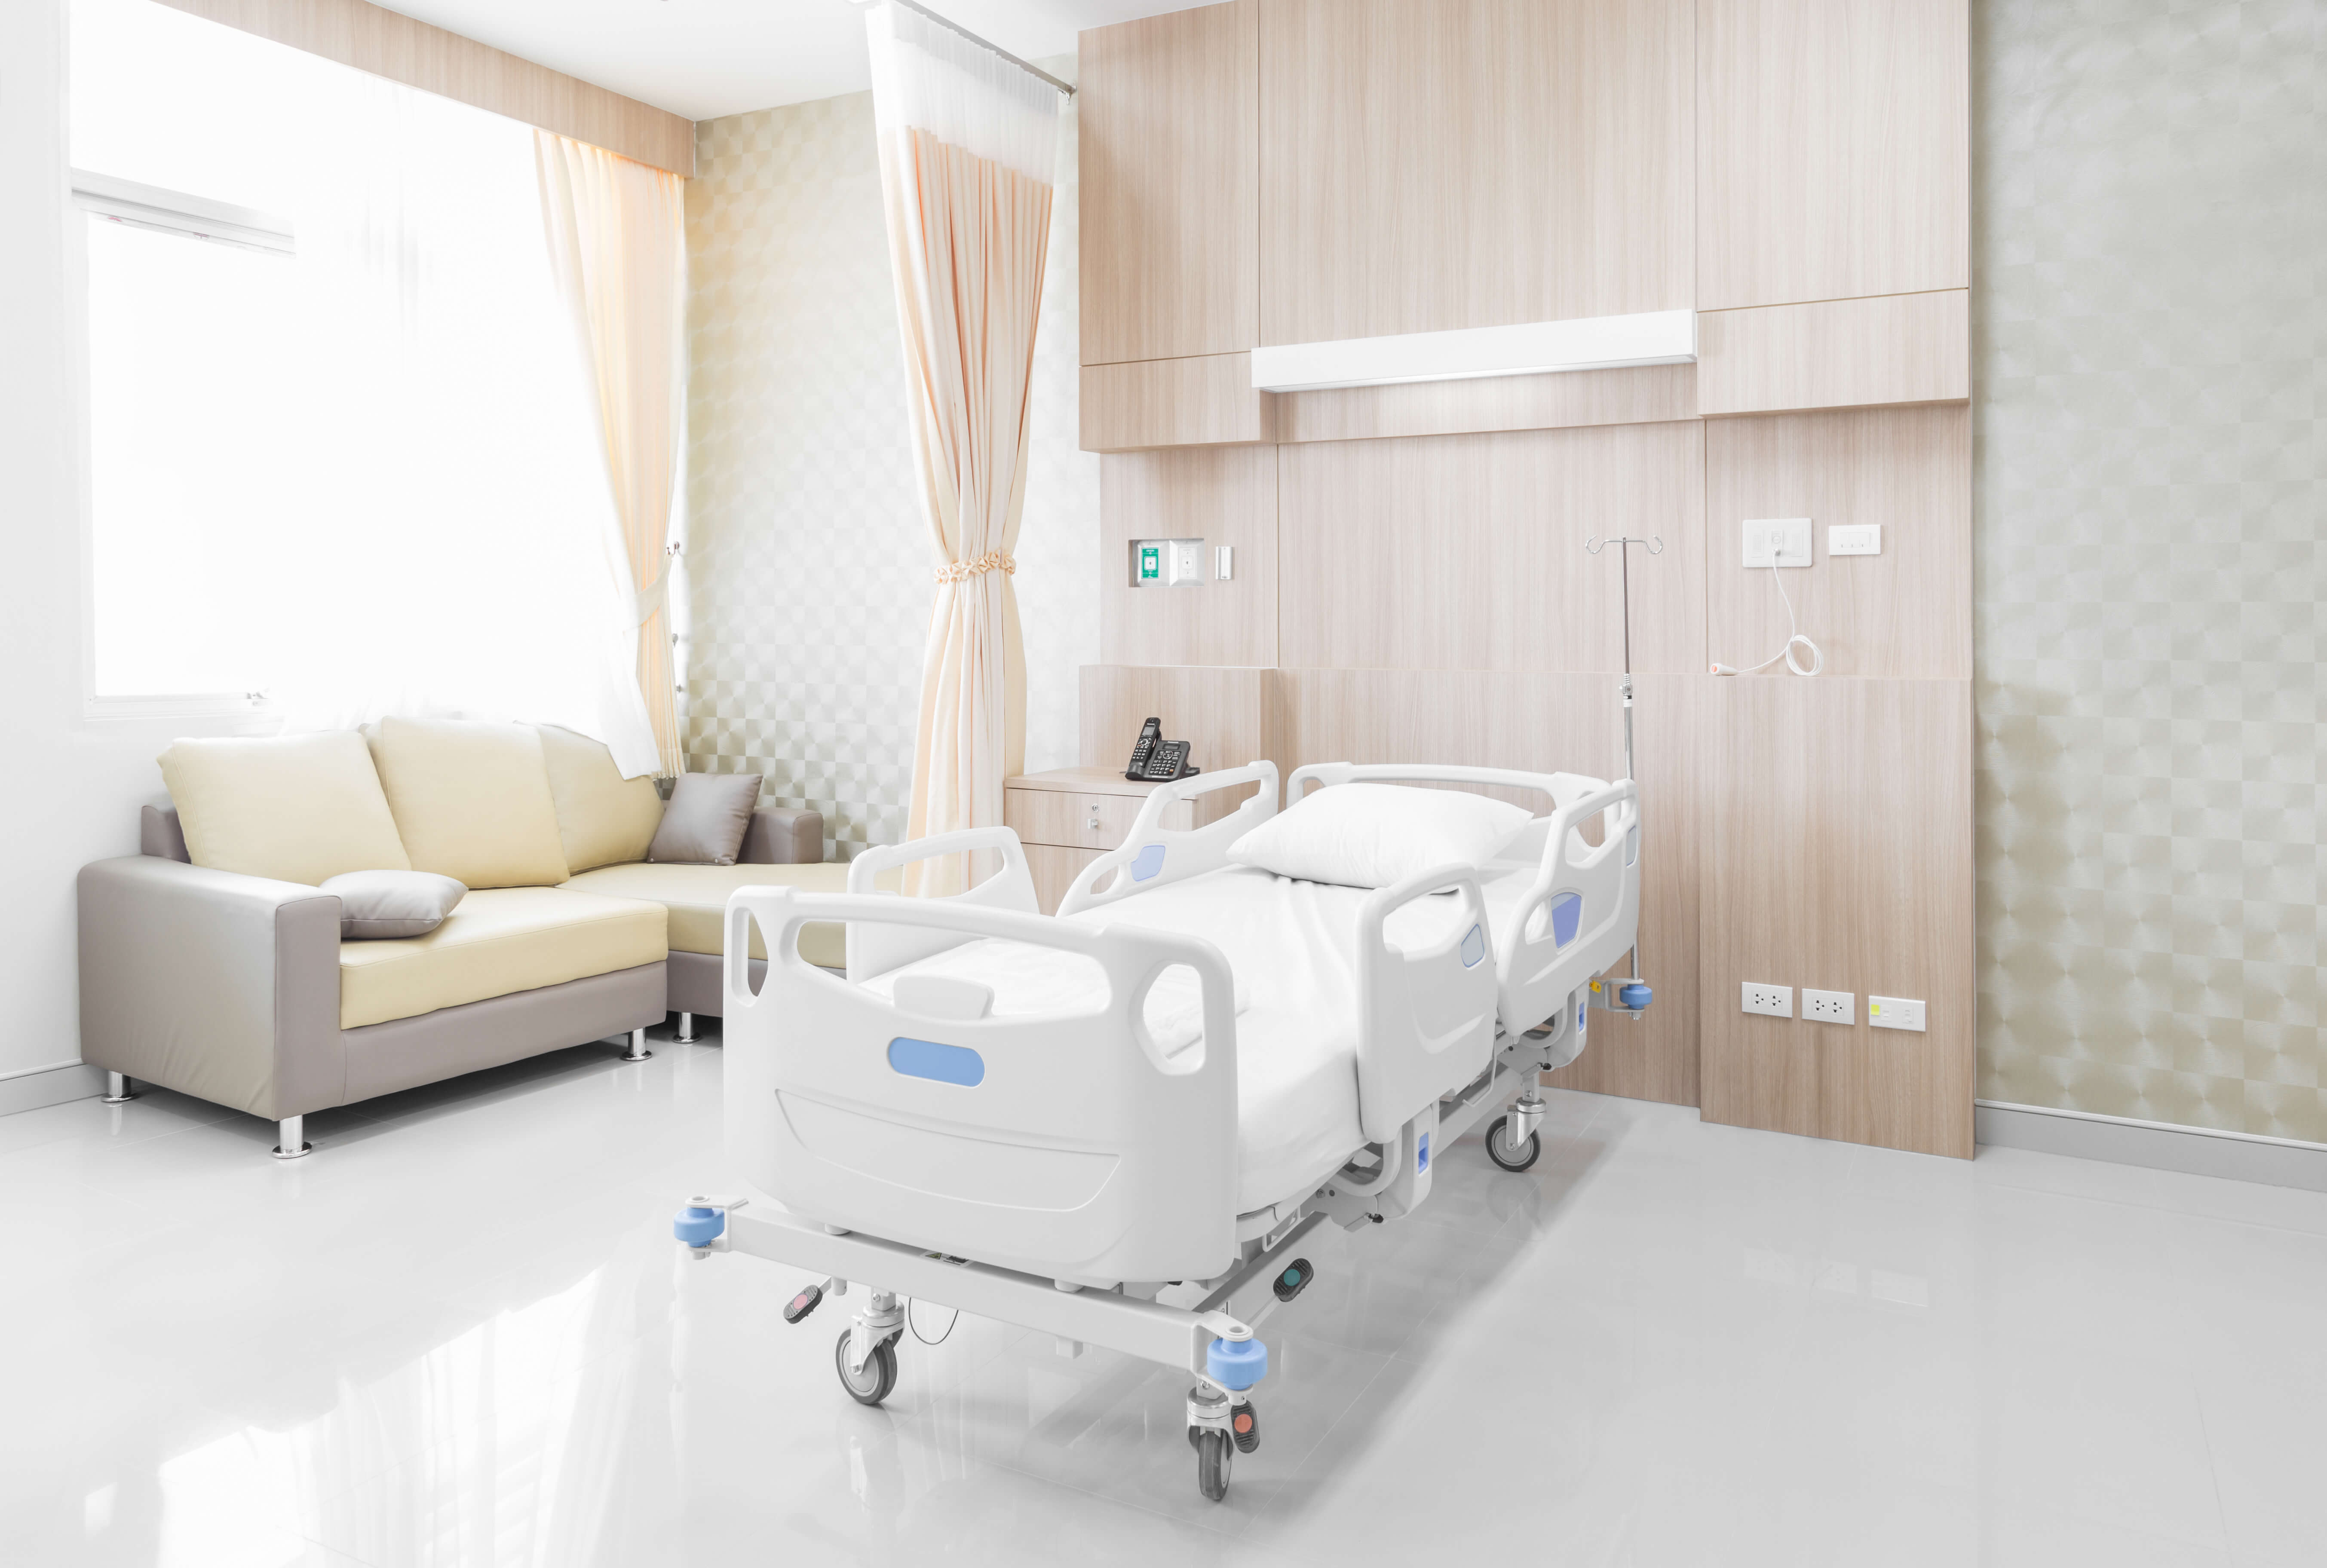 Hospital bed and couch in modern hospital room.